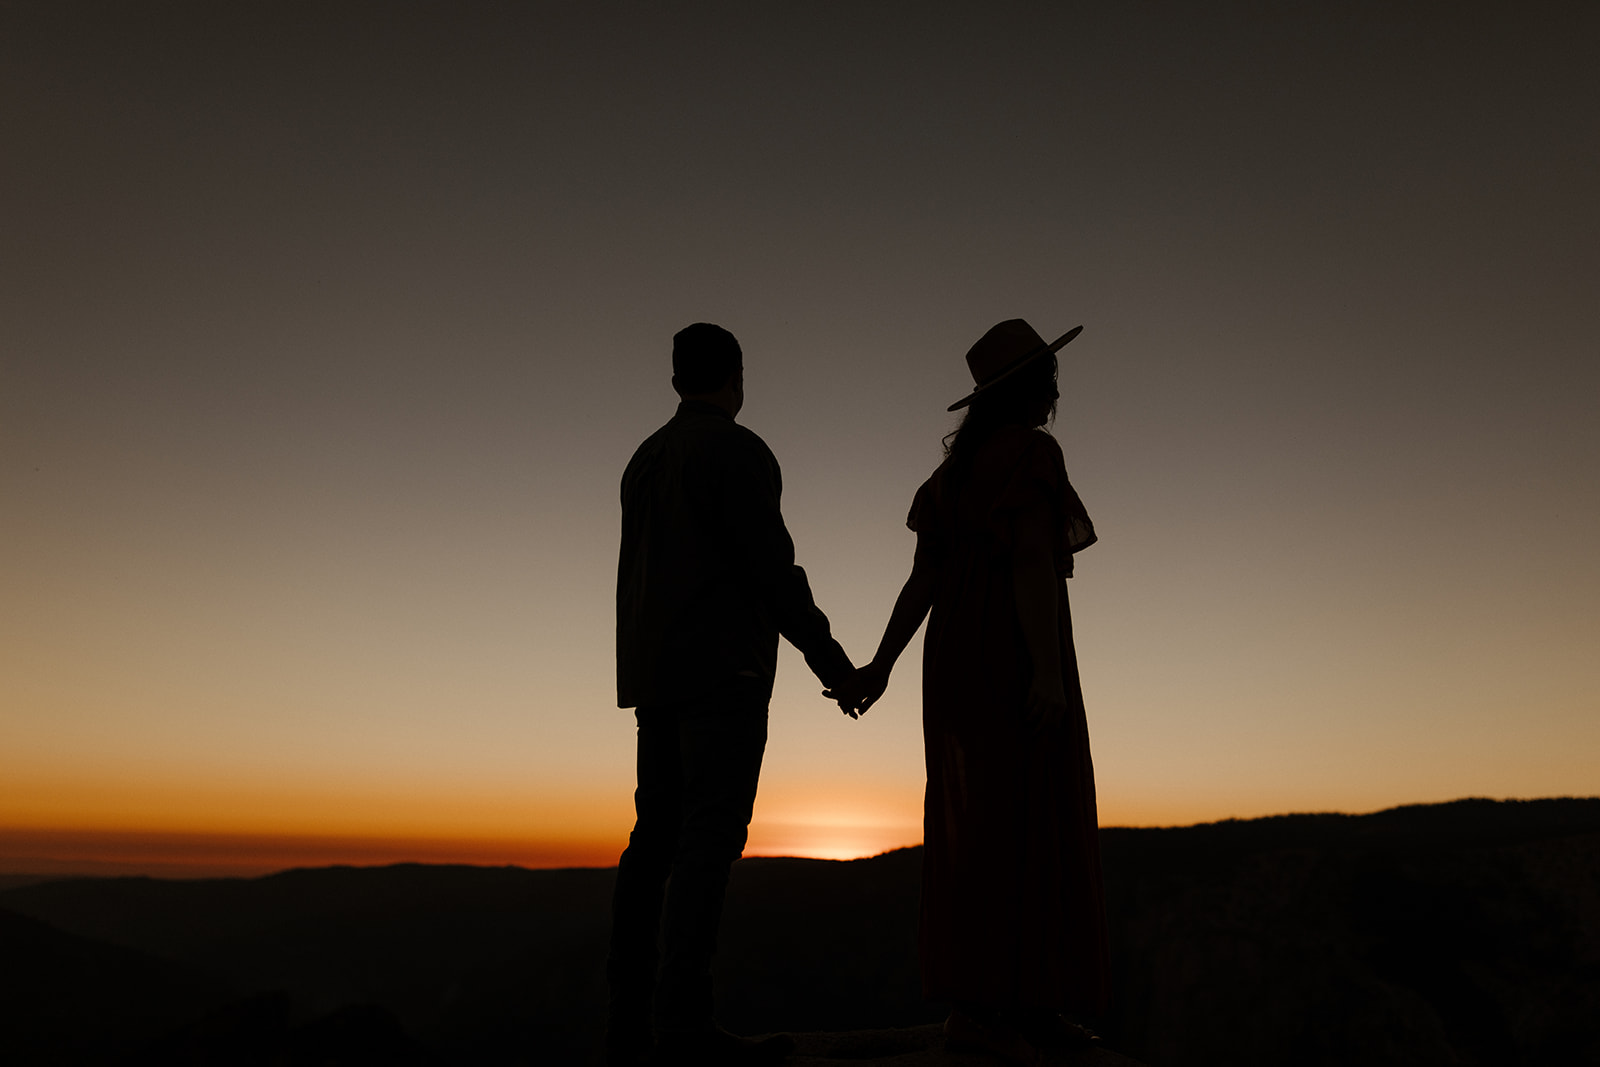 silhouettes of the couple walking at night with the last parts of sunset 